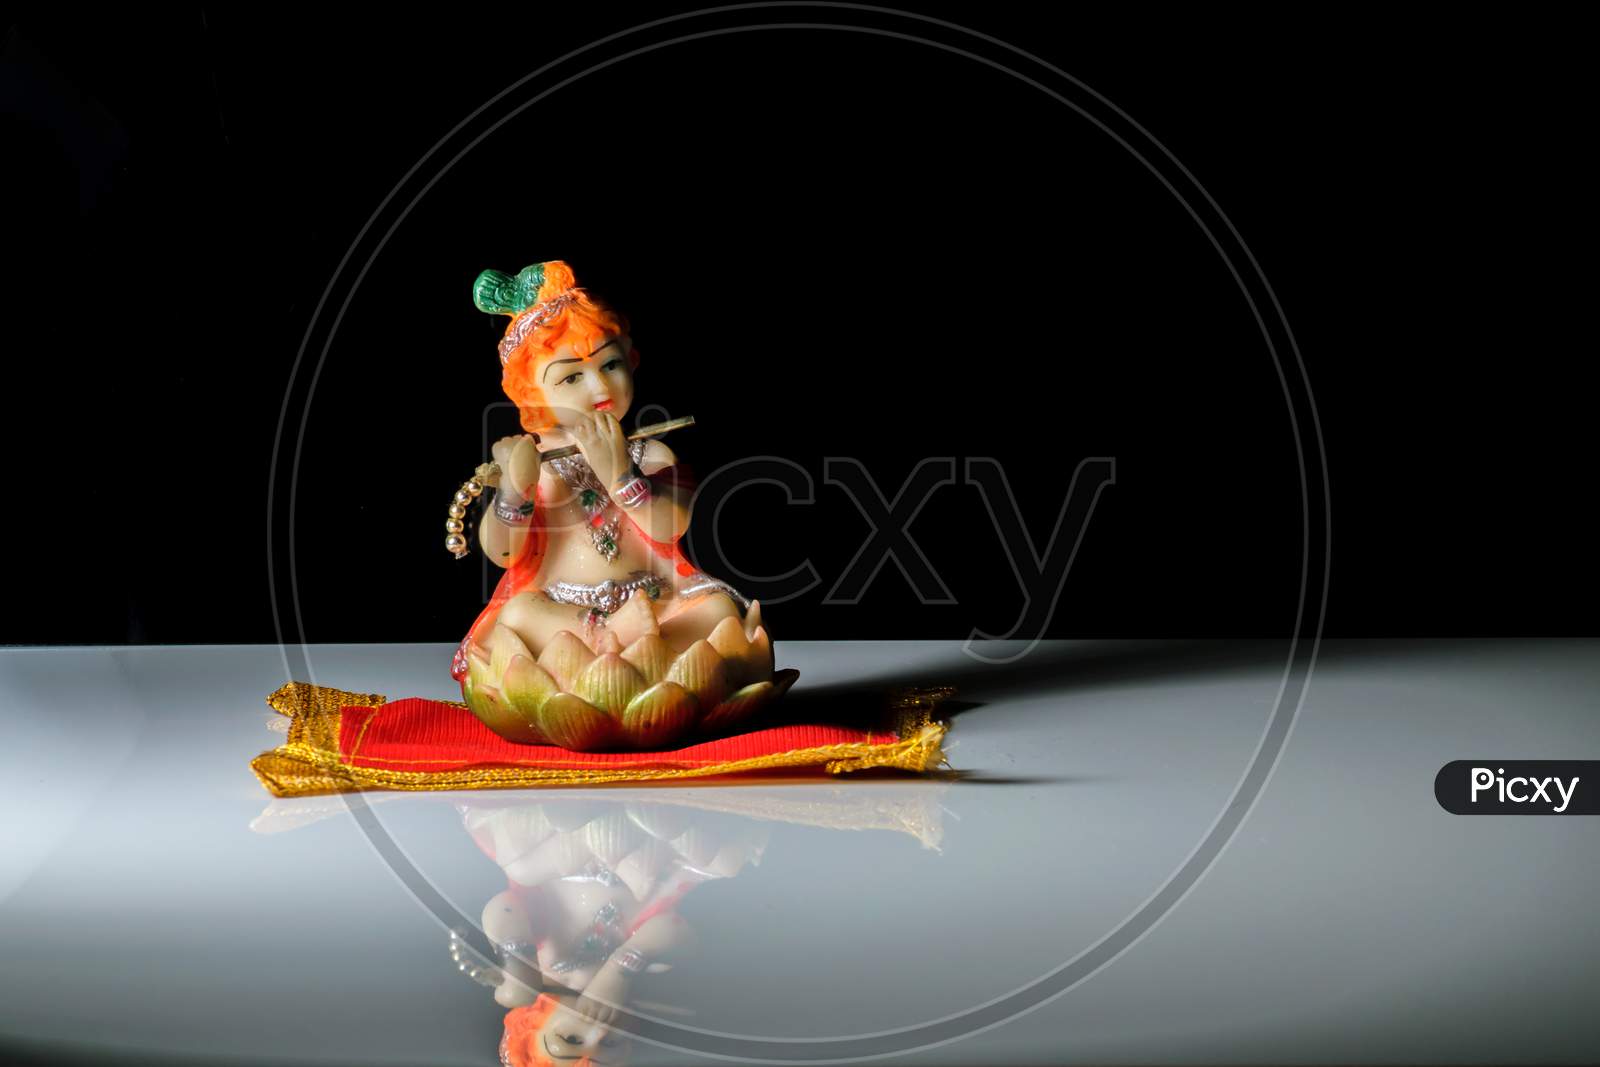 An Isolated Sculpture Of Indian God Lord Krishna Playing Flute Sitting On A Mat. On A Reflective White Table With A Dark Background